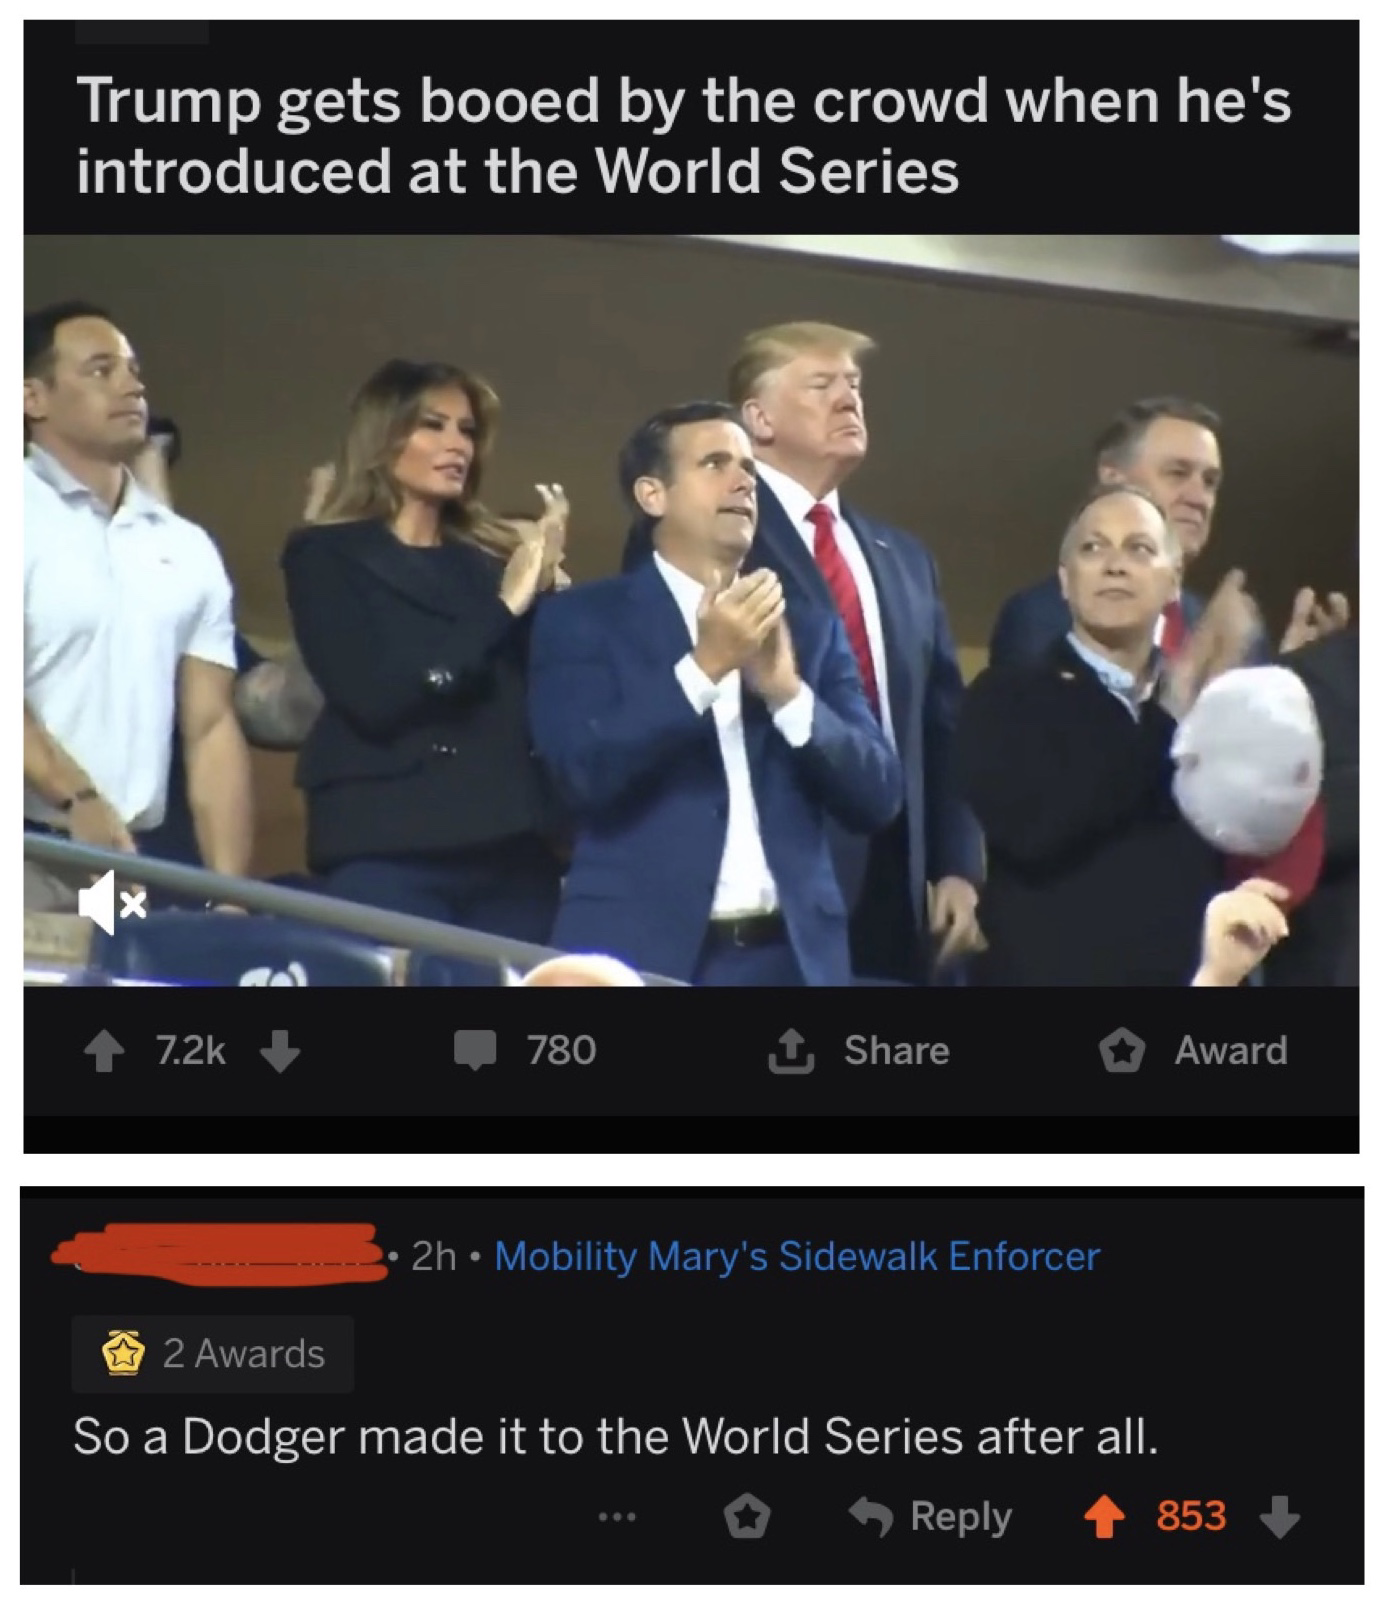 As a Dodgers fan, I have mixed feelings about this burn